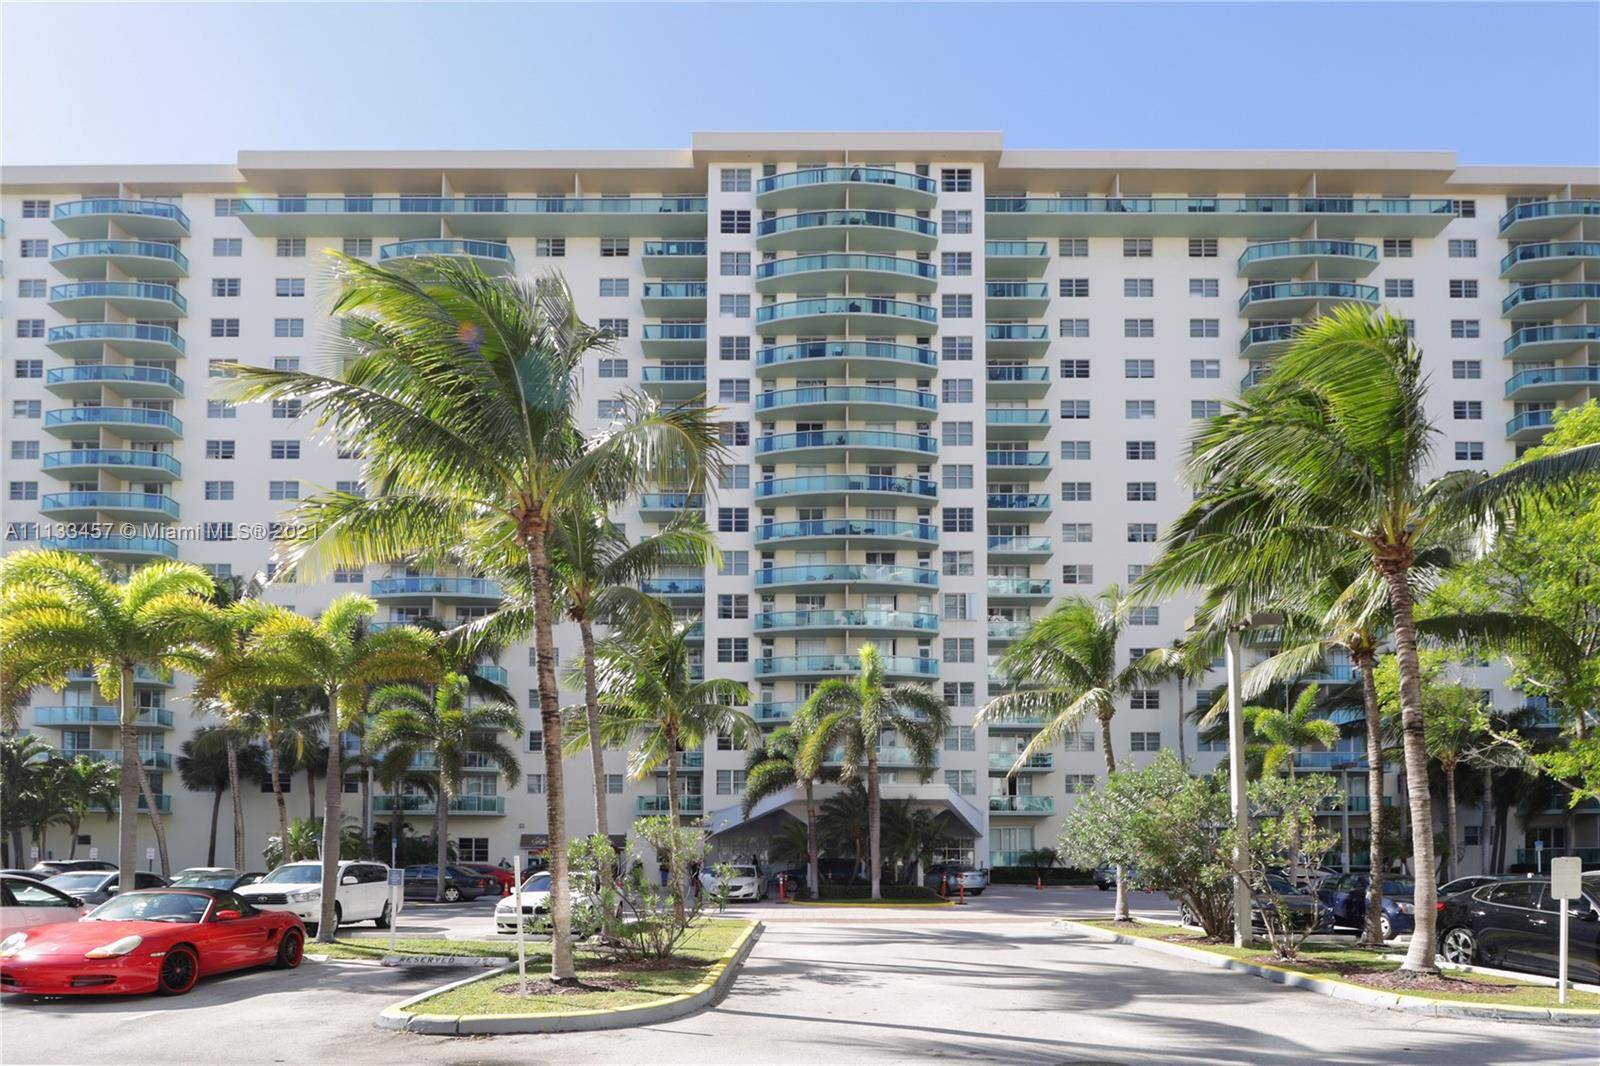 2 BEDROOMS AT OCEAN VIEW, SUNNY ISLES BEACH, FULLY REMODELED WITH BEAUTIFUL OCEAN AND INTRACOASTAL VIEW.